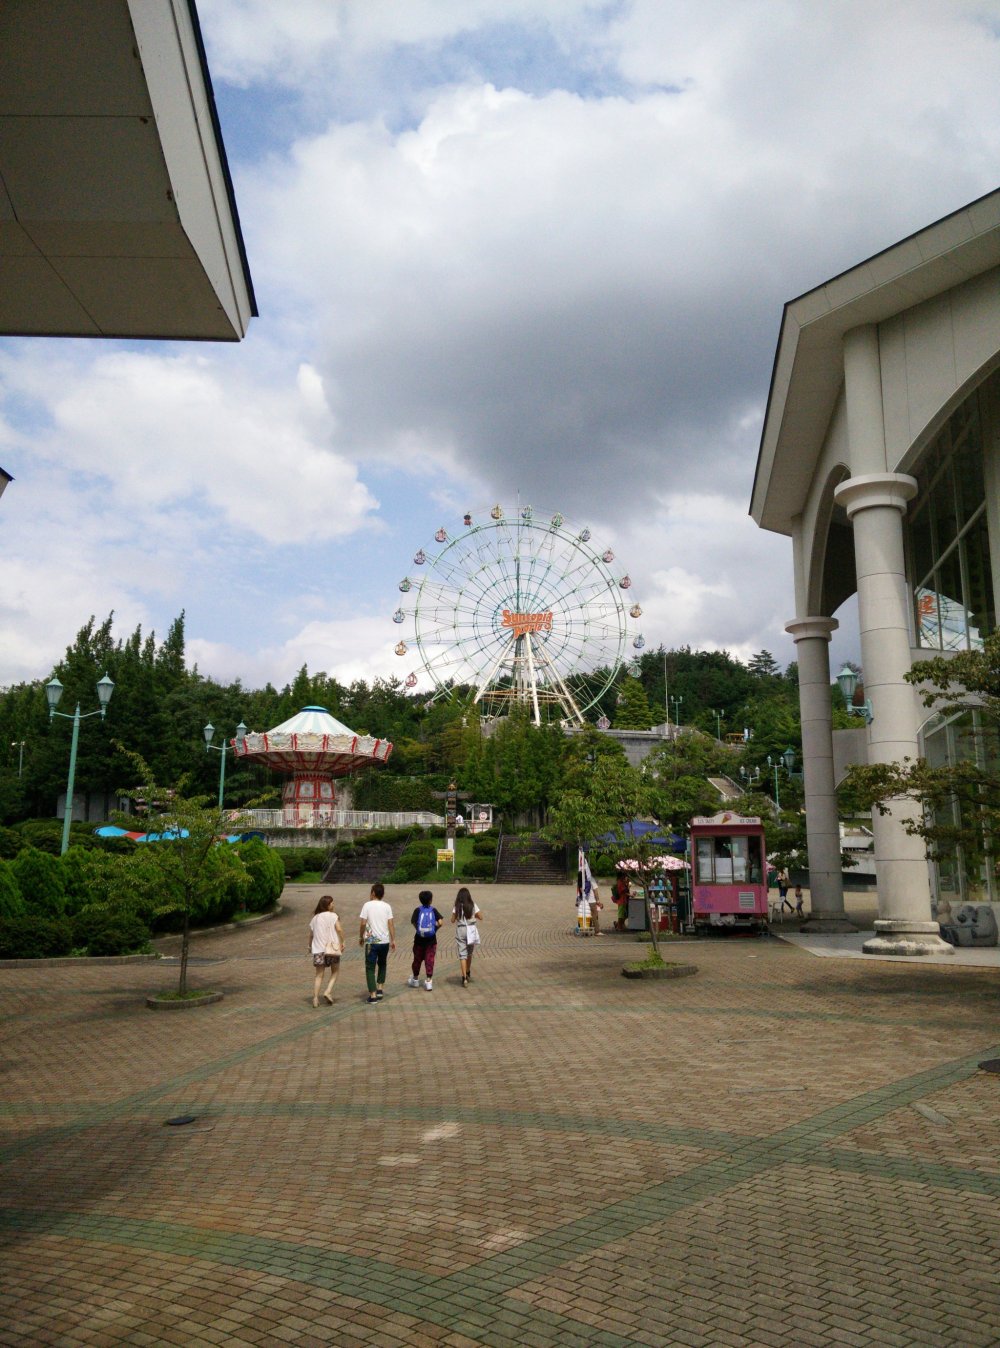 The Ferris Wheel from the entrance plaza